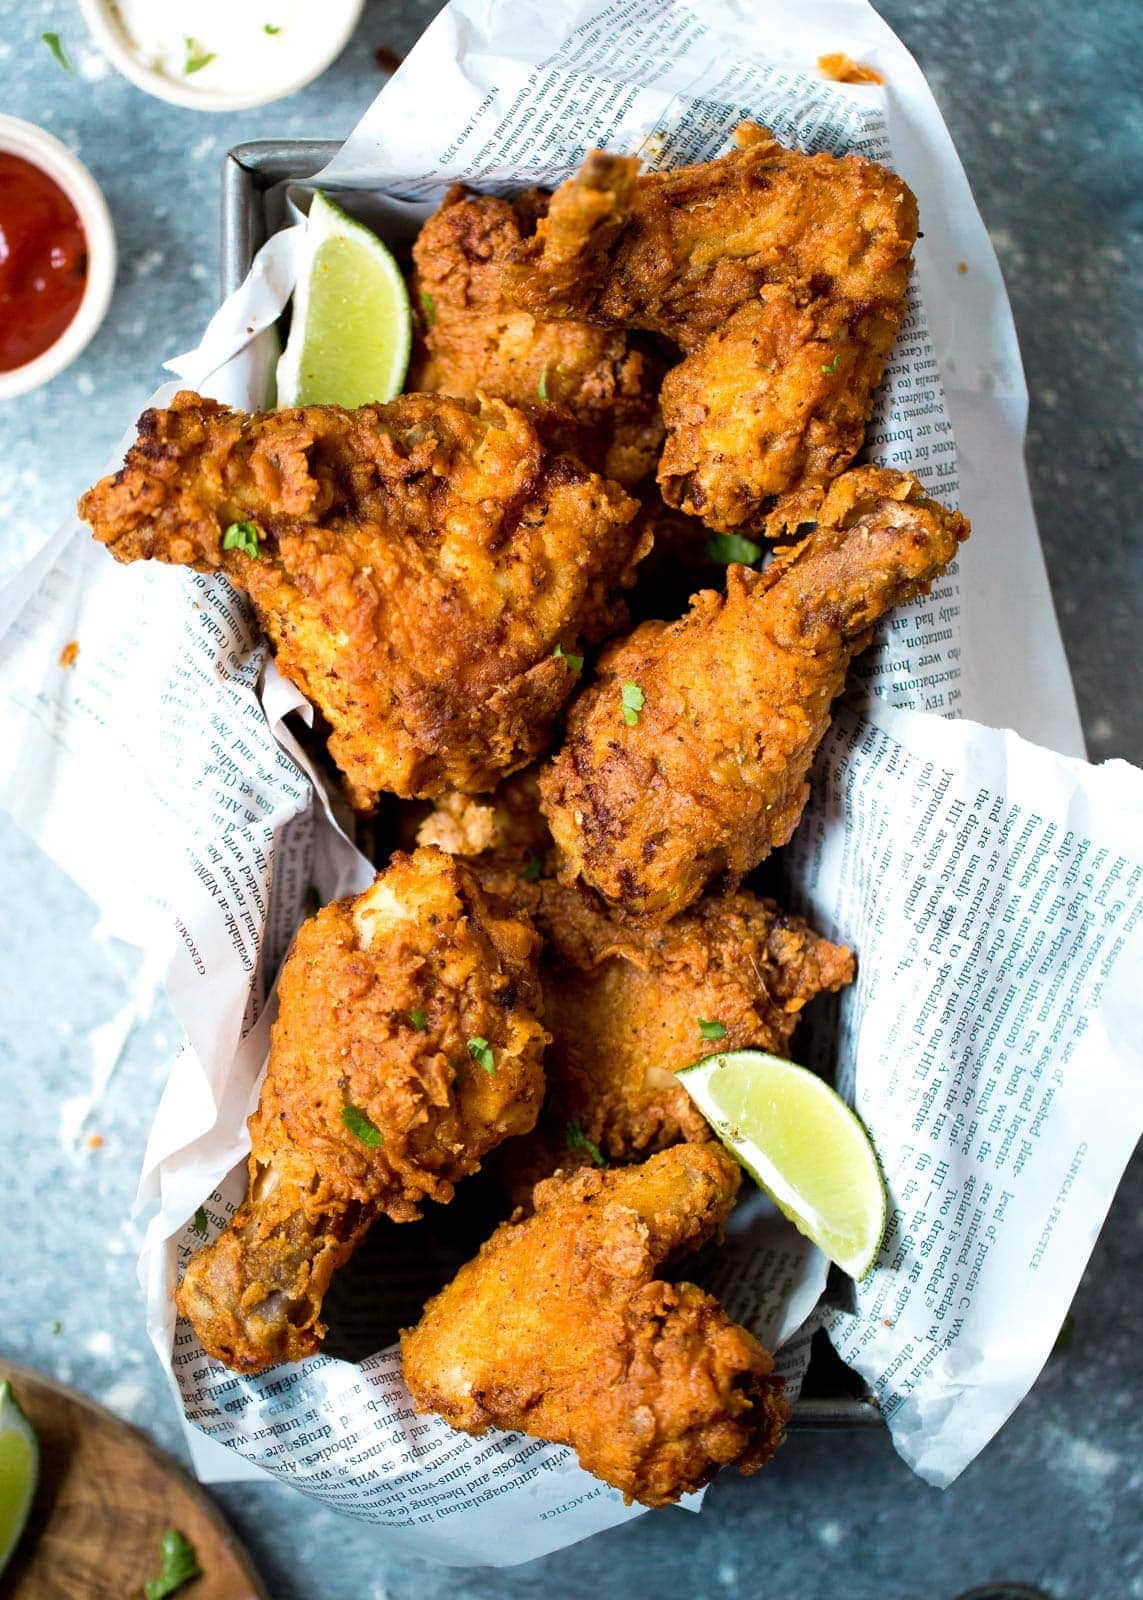 Crispy, crunchy, tender Buttermilk Fried Chicken that's perfect for Superbowl Sunday.